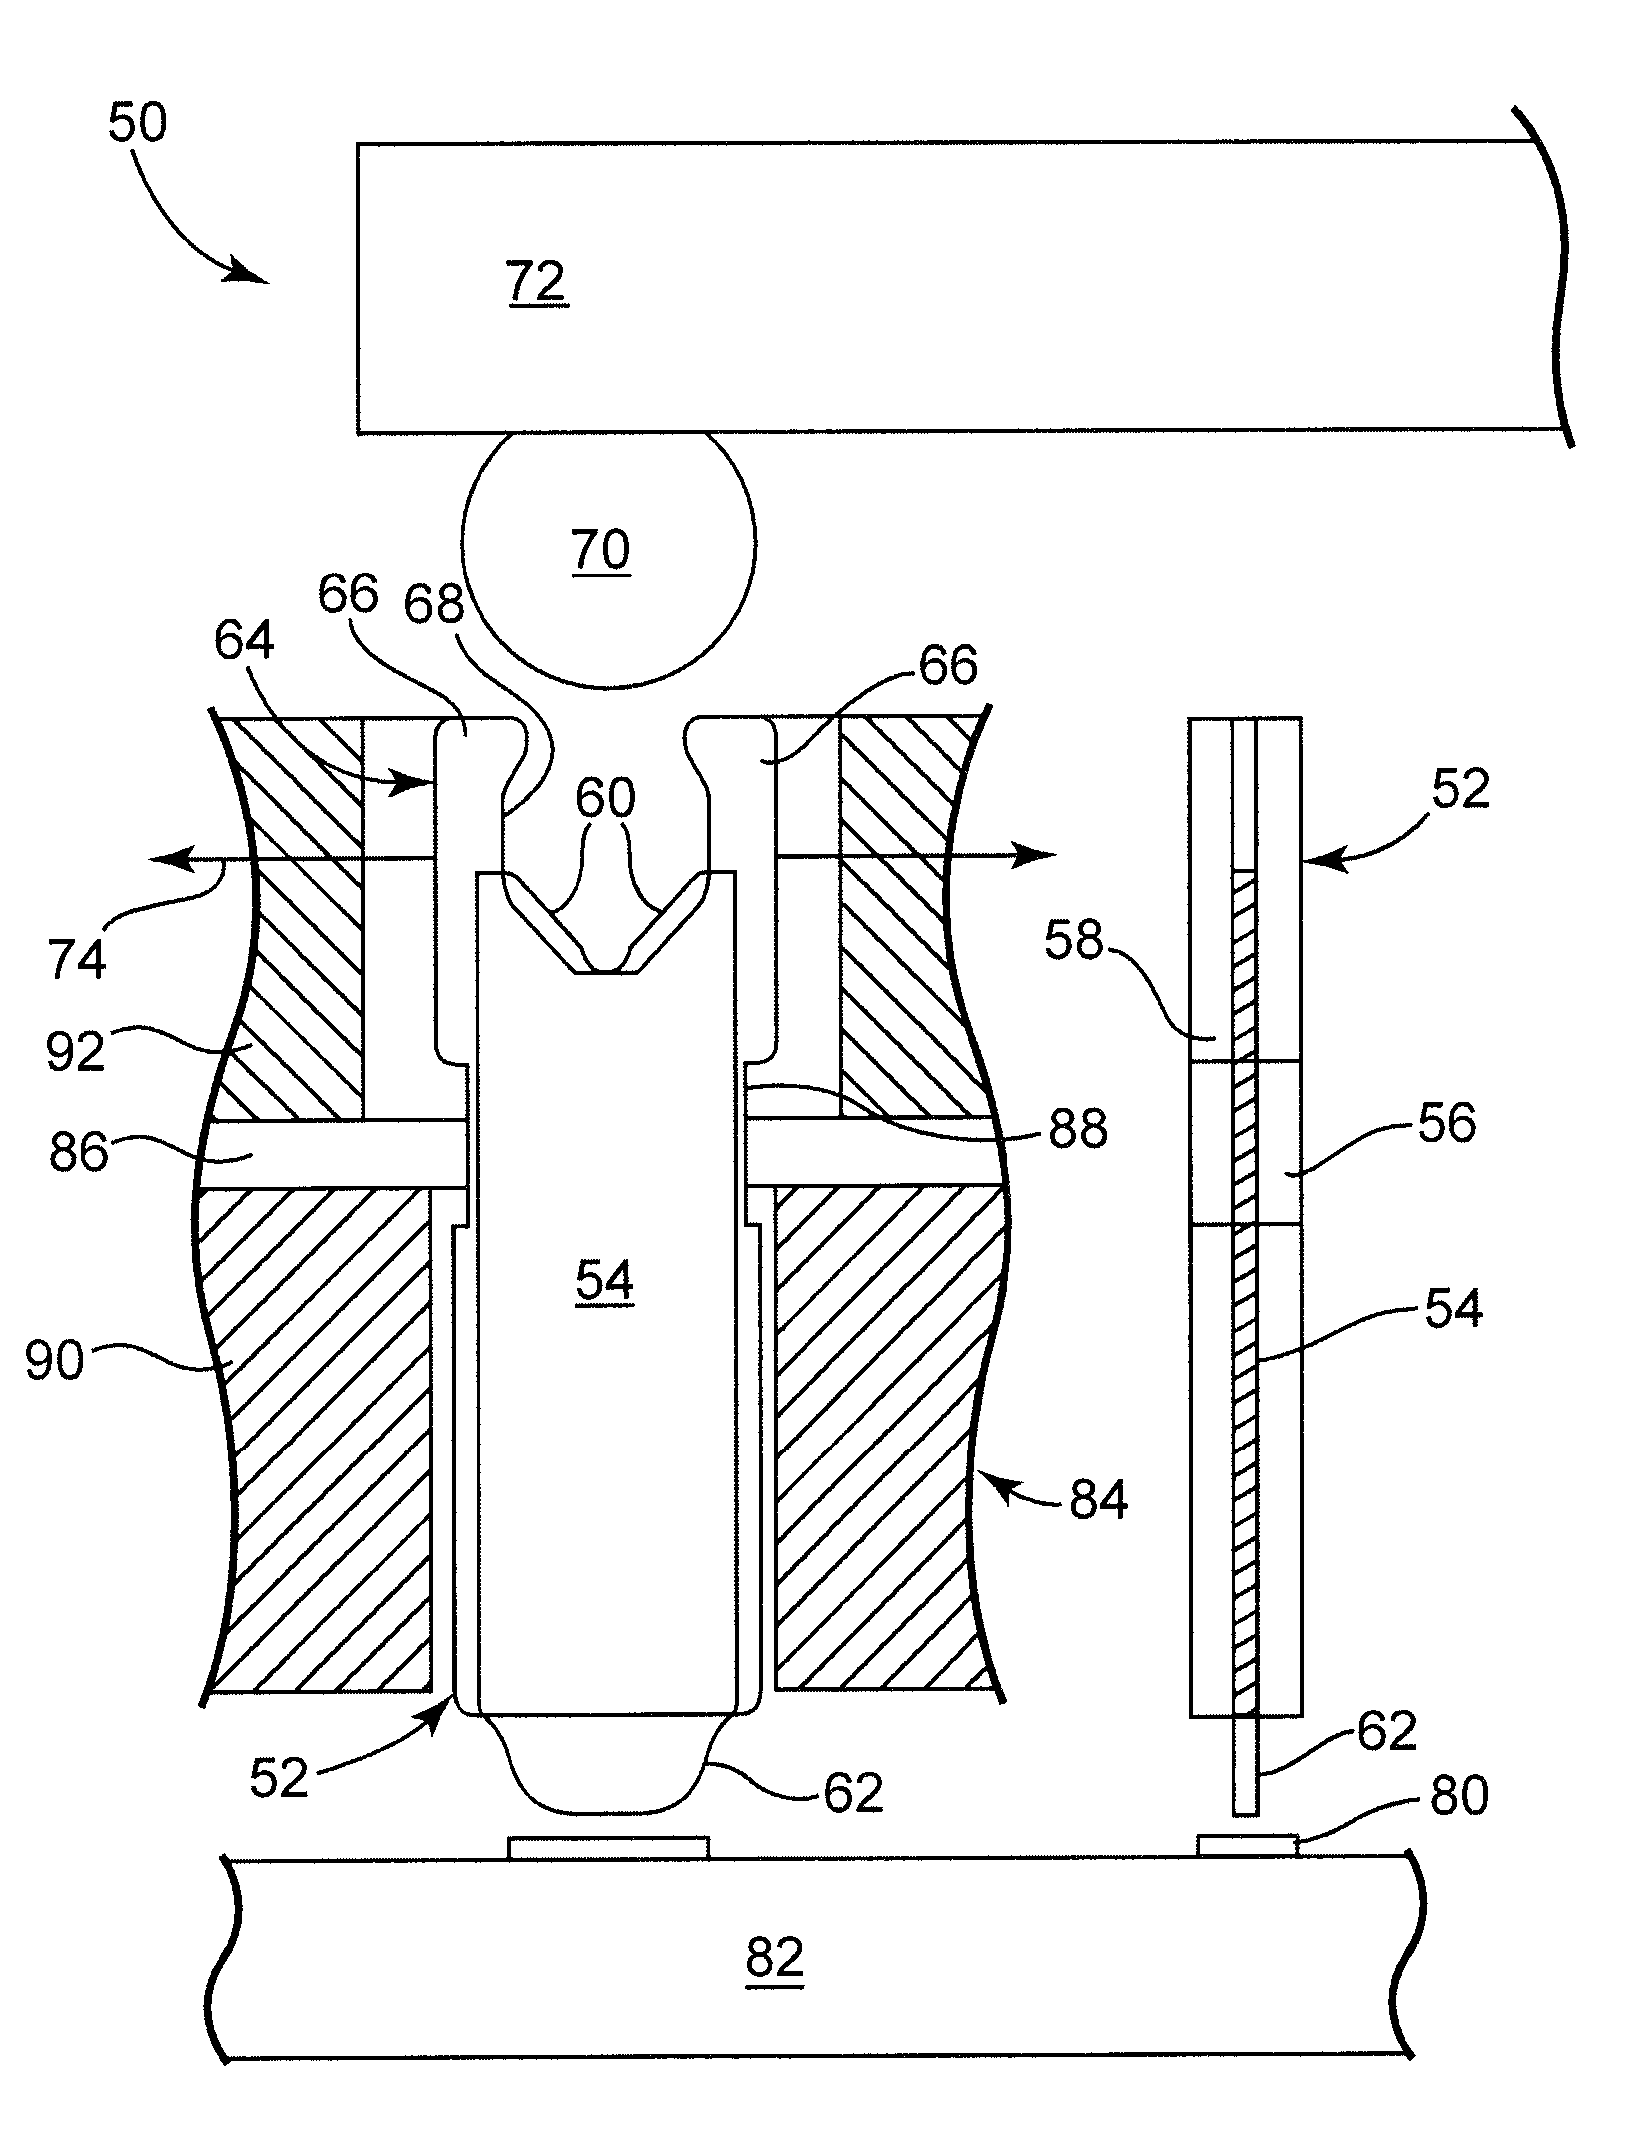 Composite contact for fine pitch electrical interconnect assembly